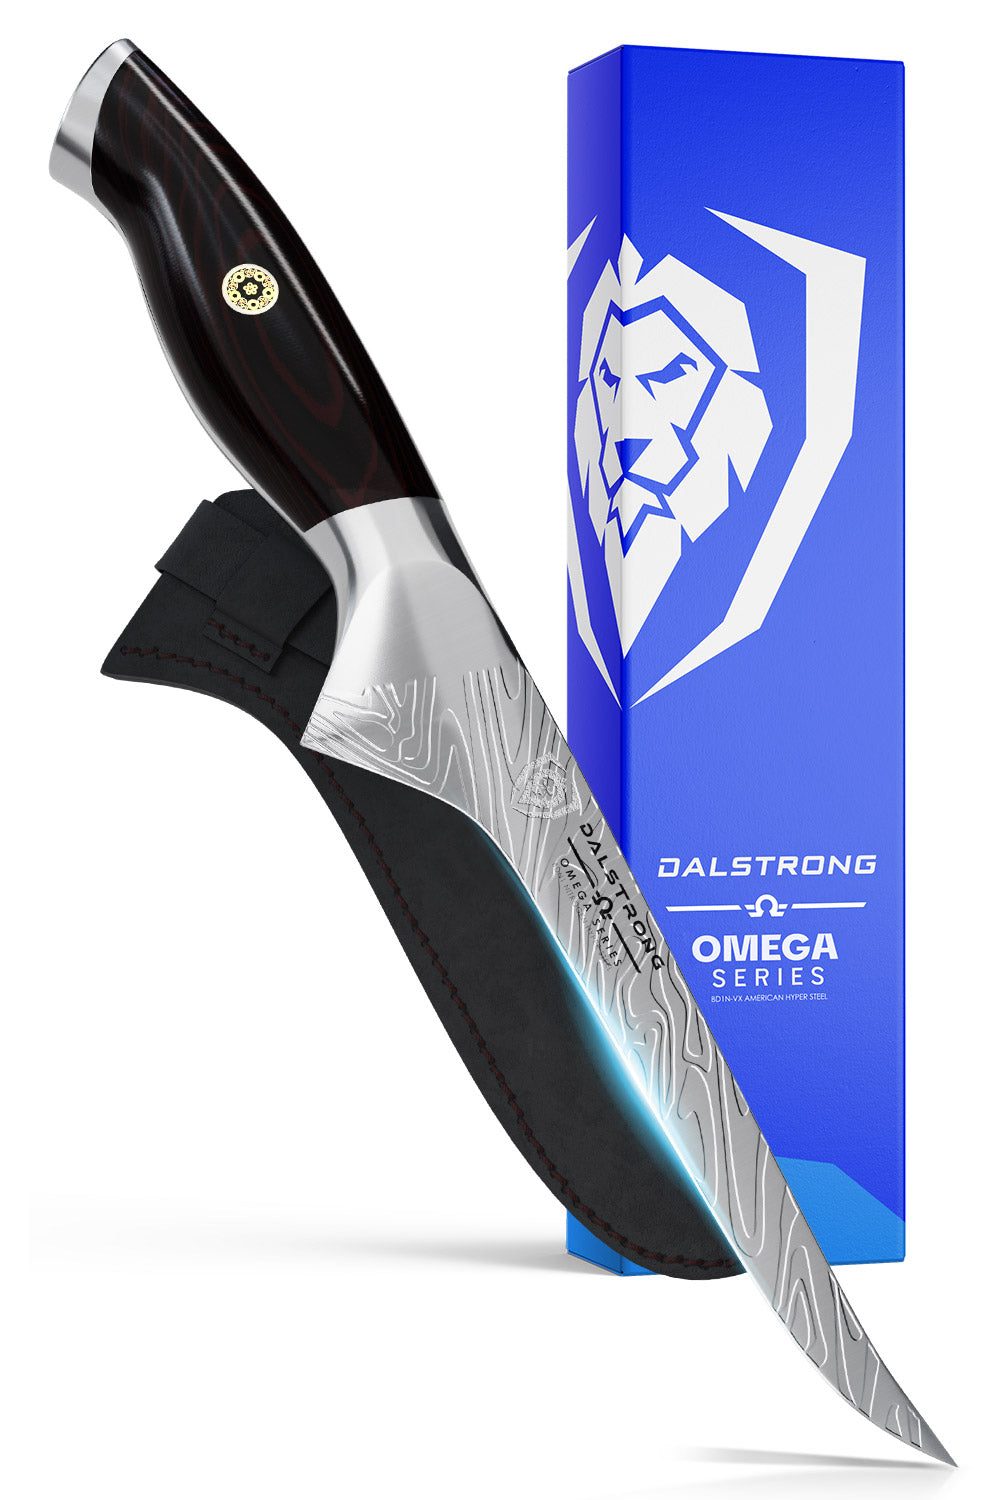 Dalstrong omega series 6 inch straight boning knife in front of it's premium packaging.